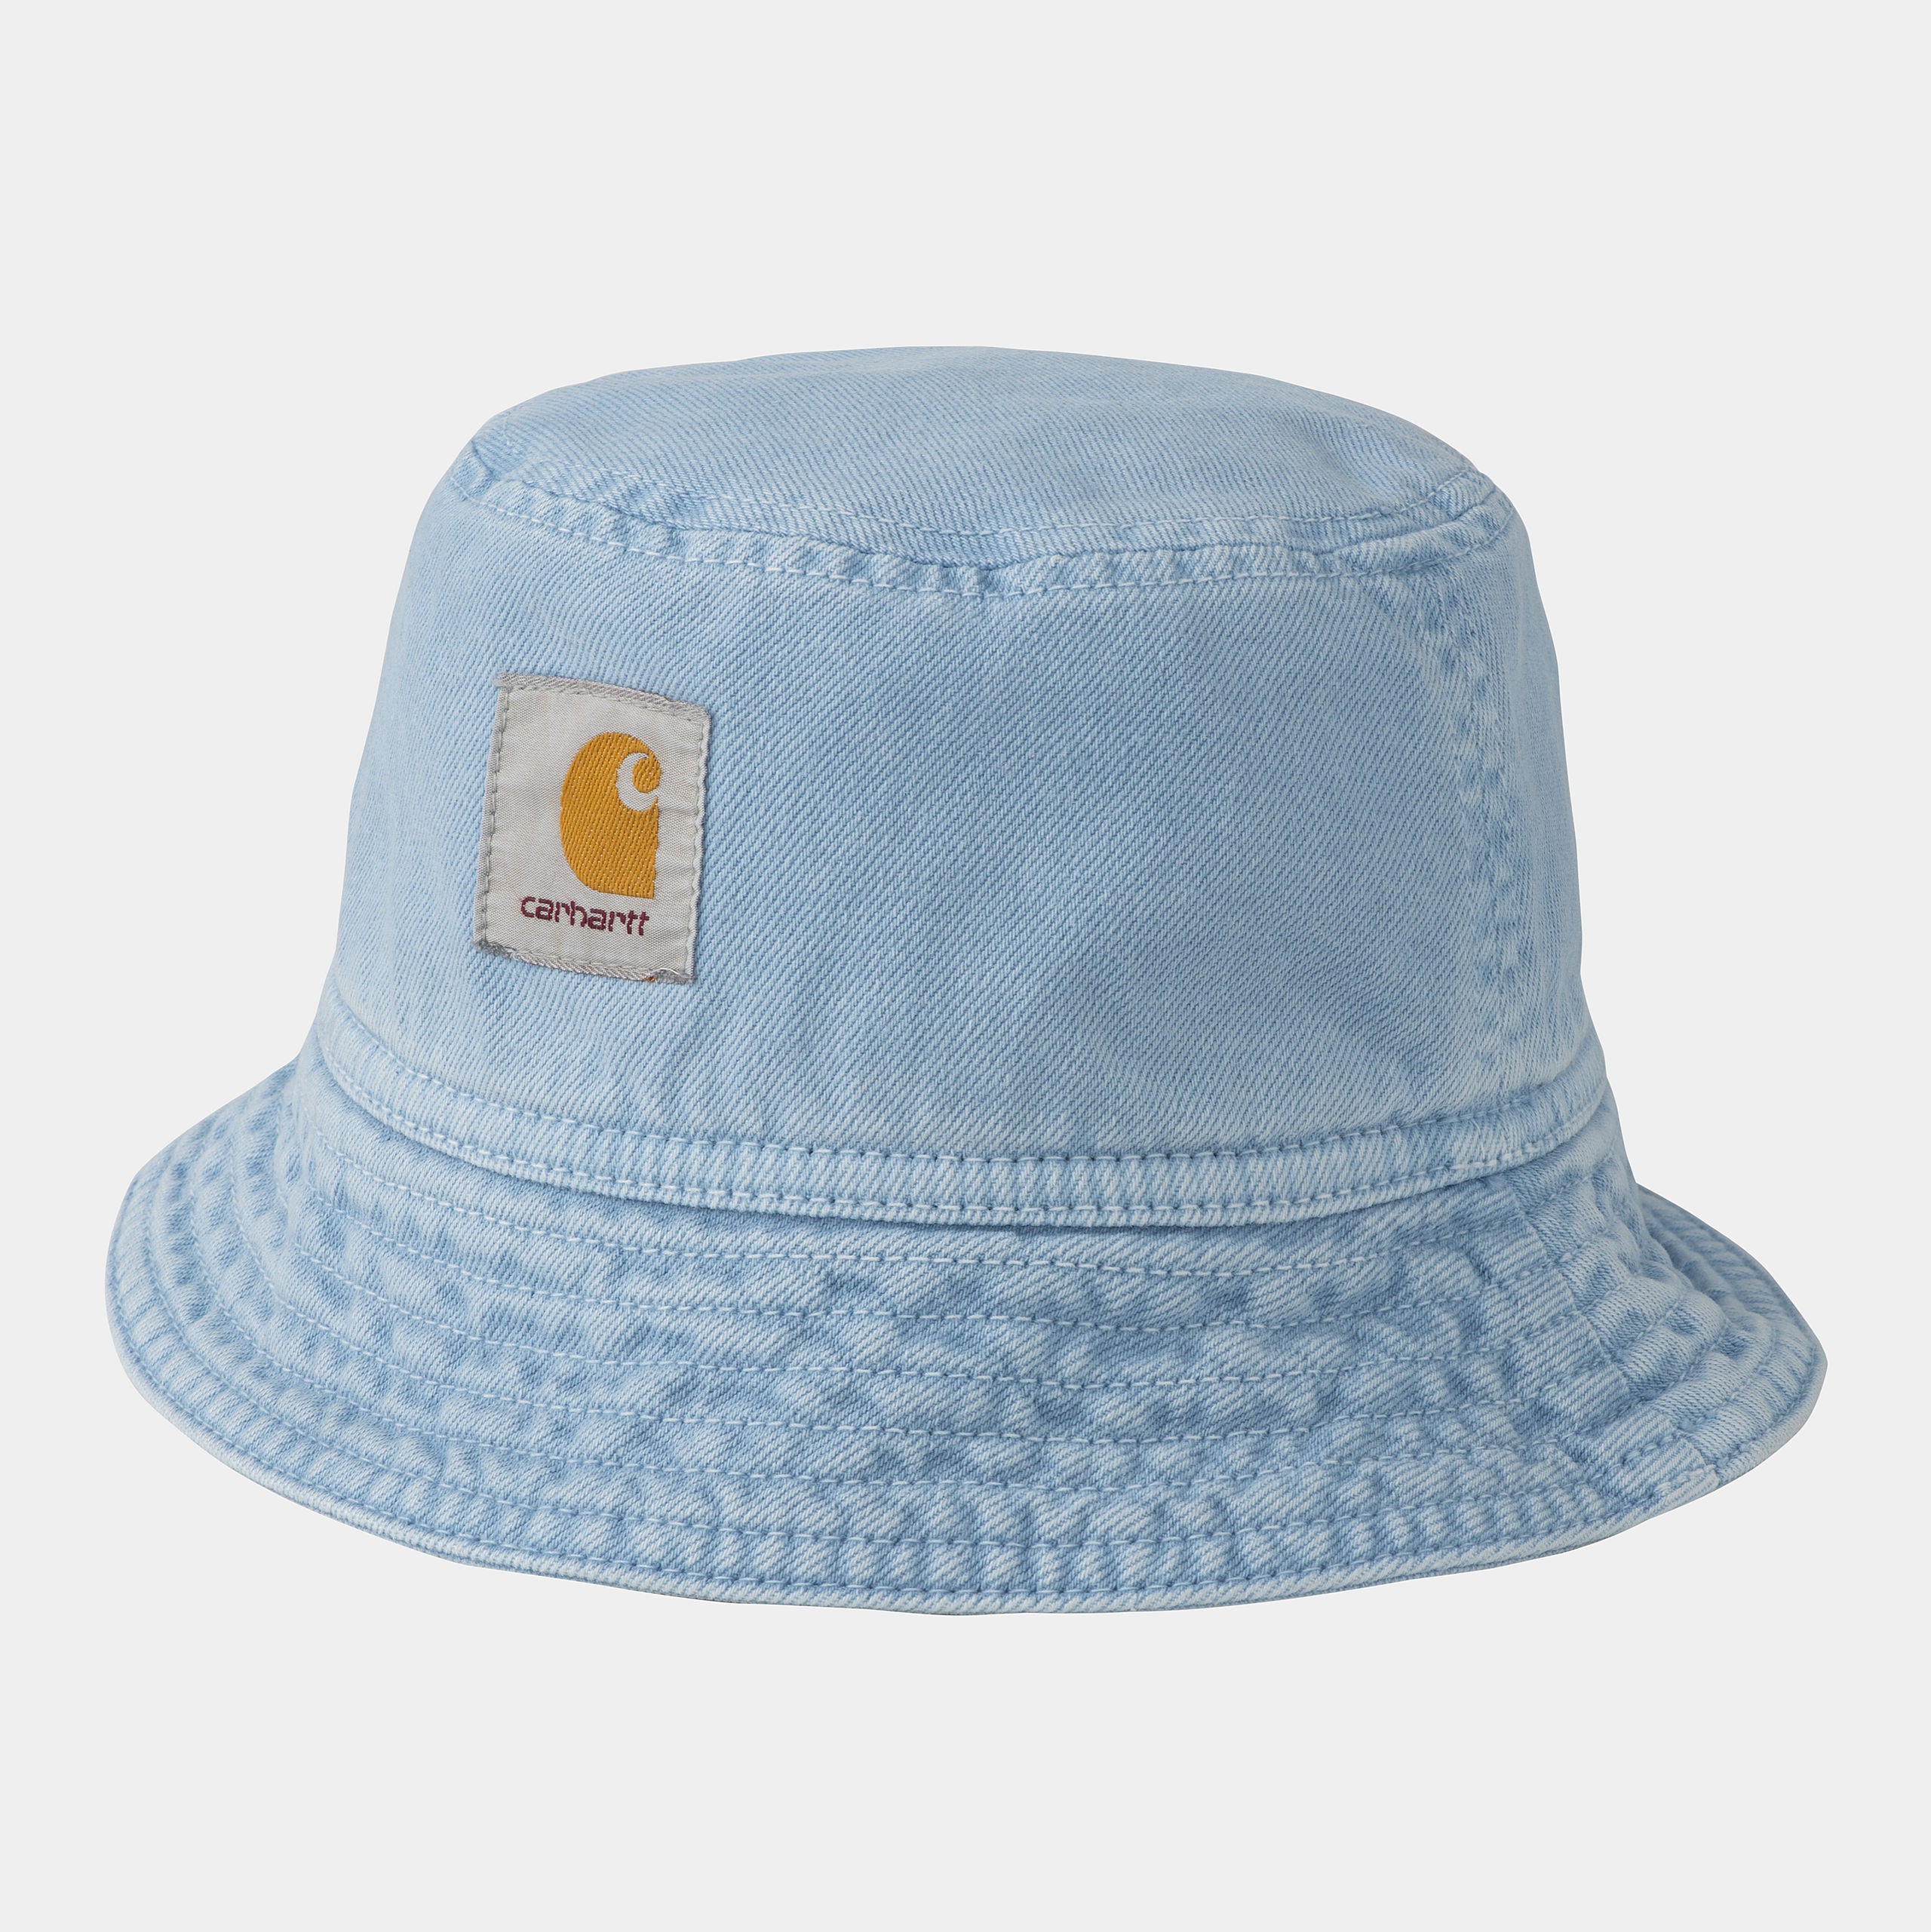 garrison-bucket-hat-frosted-blue-stone-dyed-473_png.jpg